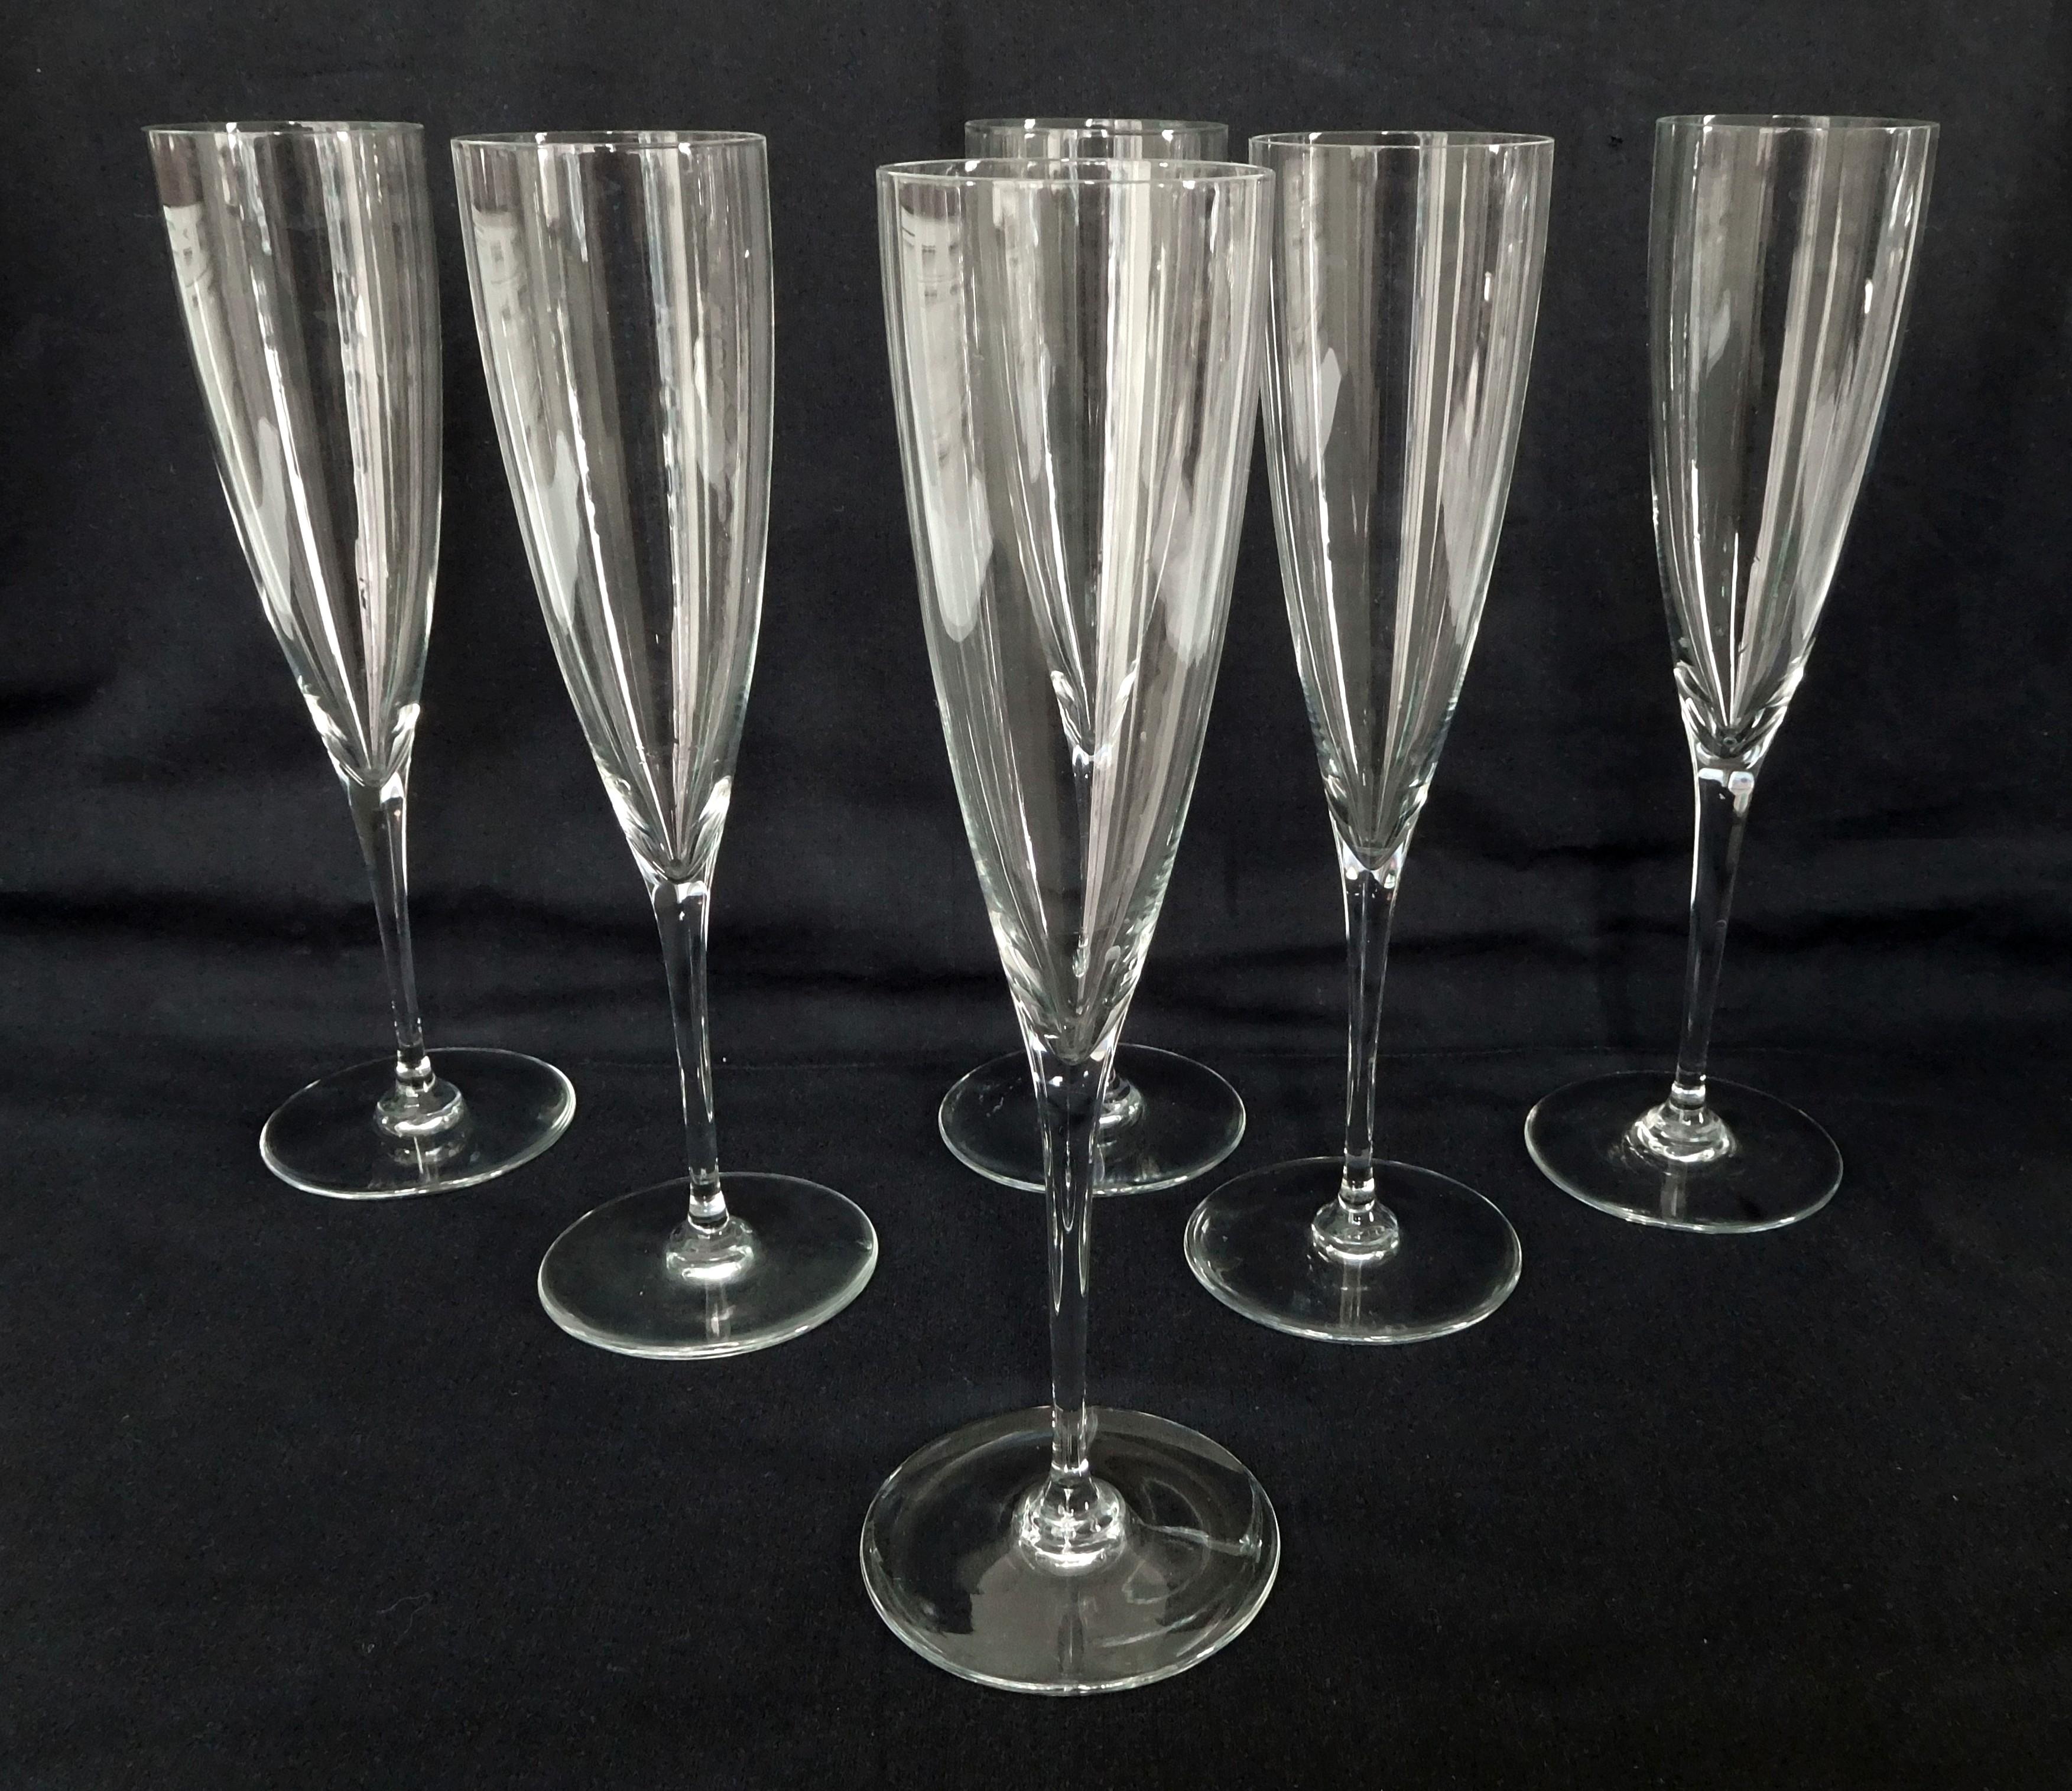 Set of 6 Baccarat crystal champagne flutes, Dom Perignon pattern.
Dom Perignon model has been named after a French monk who was also a leading figure in oenology in the late 17th century / early 18th century.
Baccarat manufacture created Dom